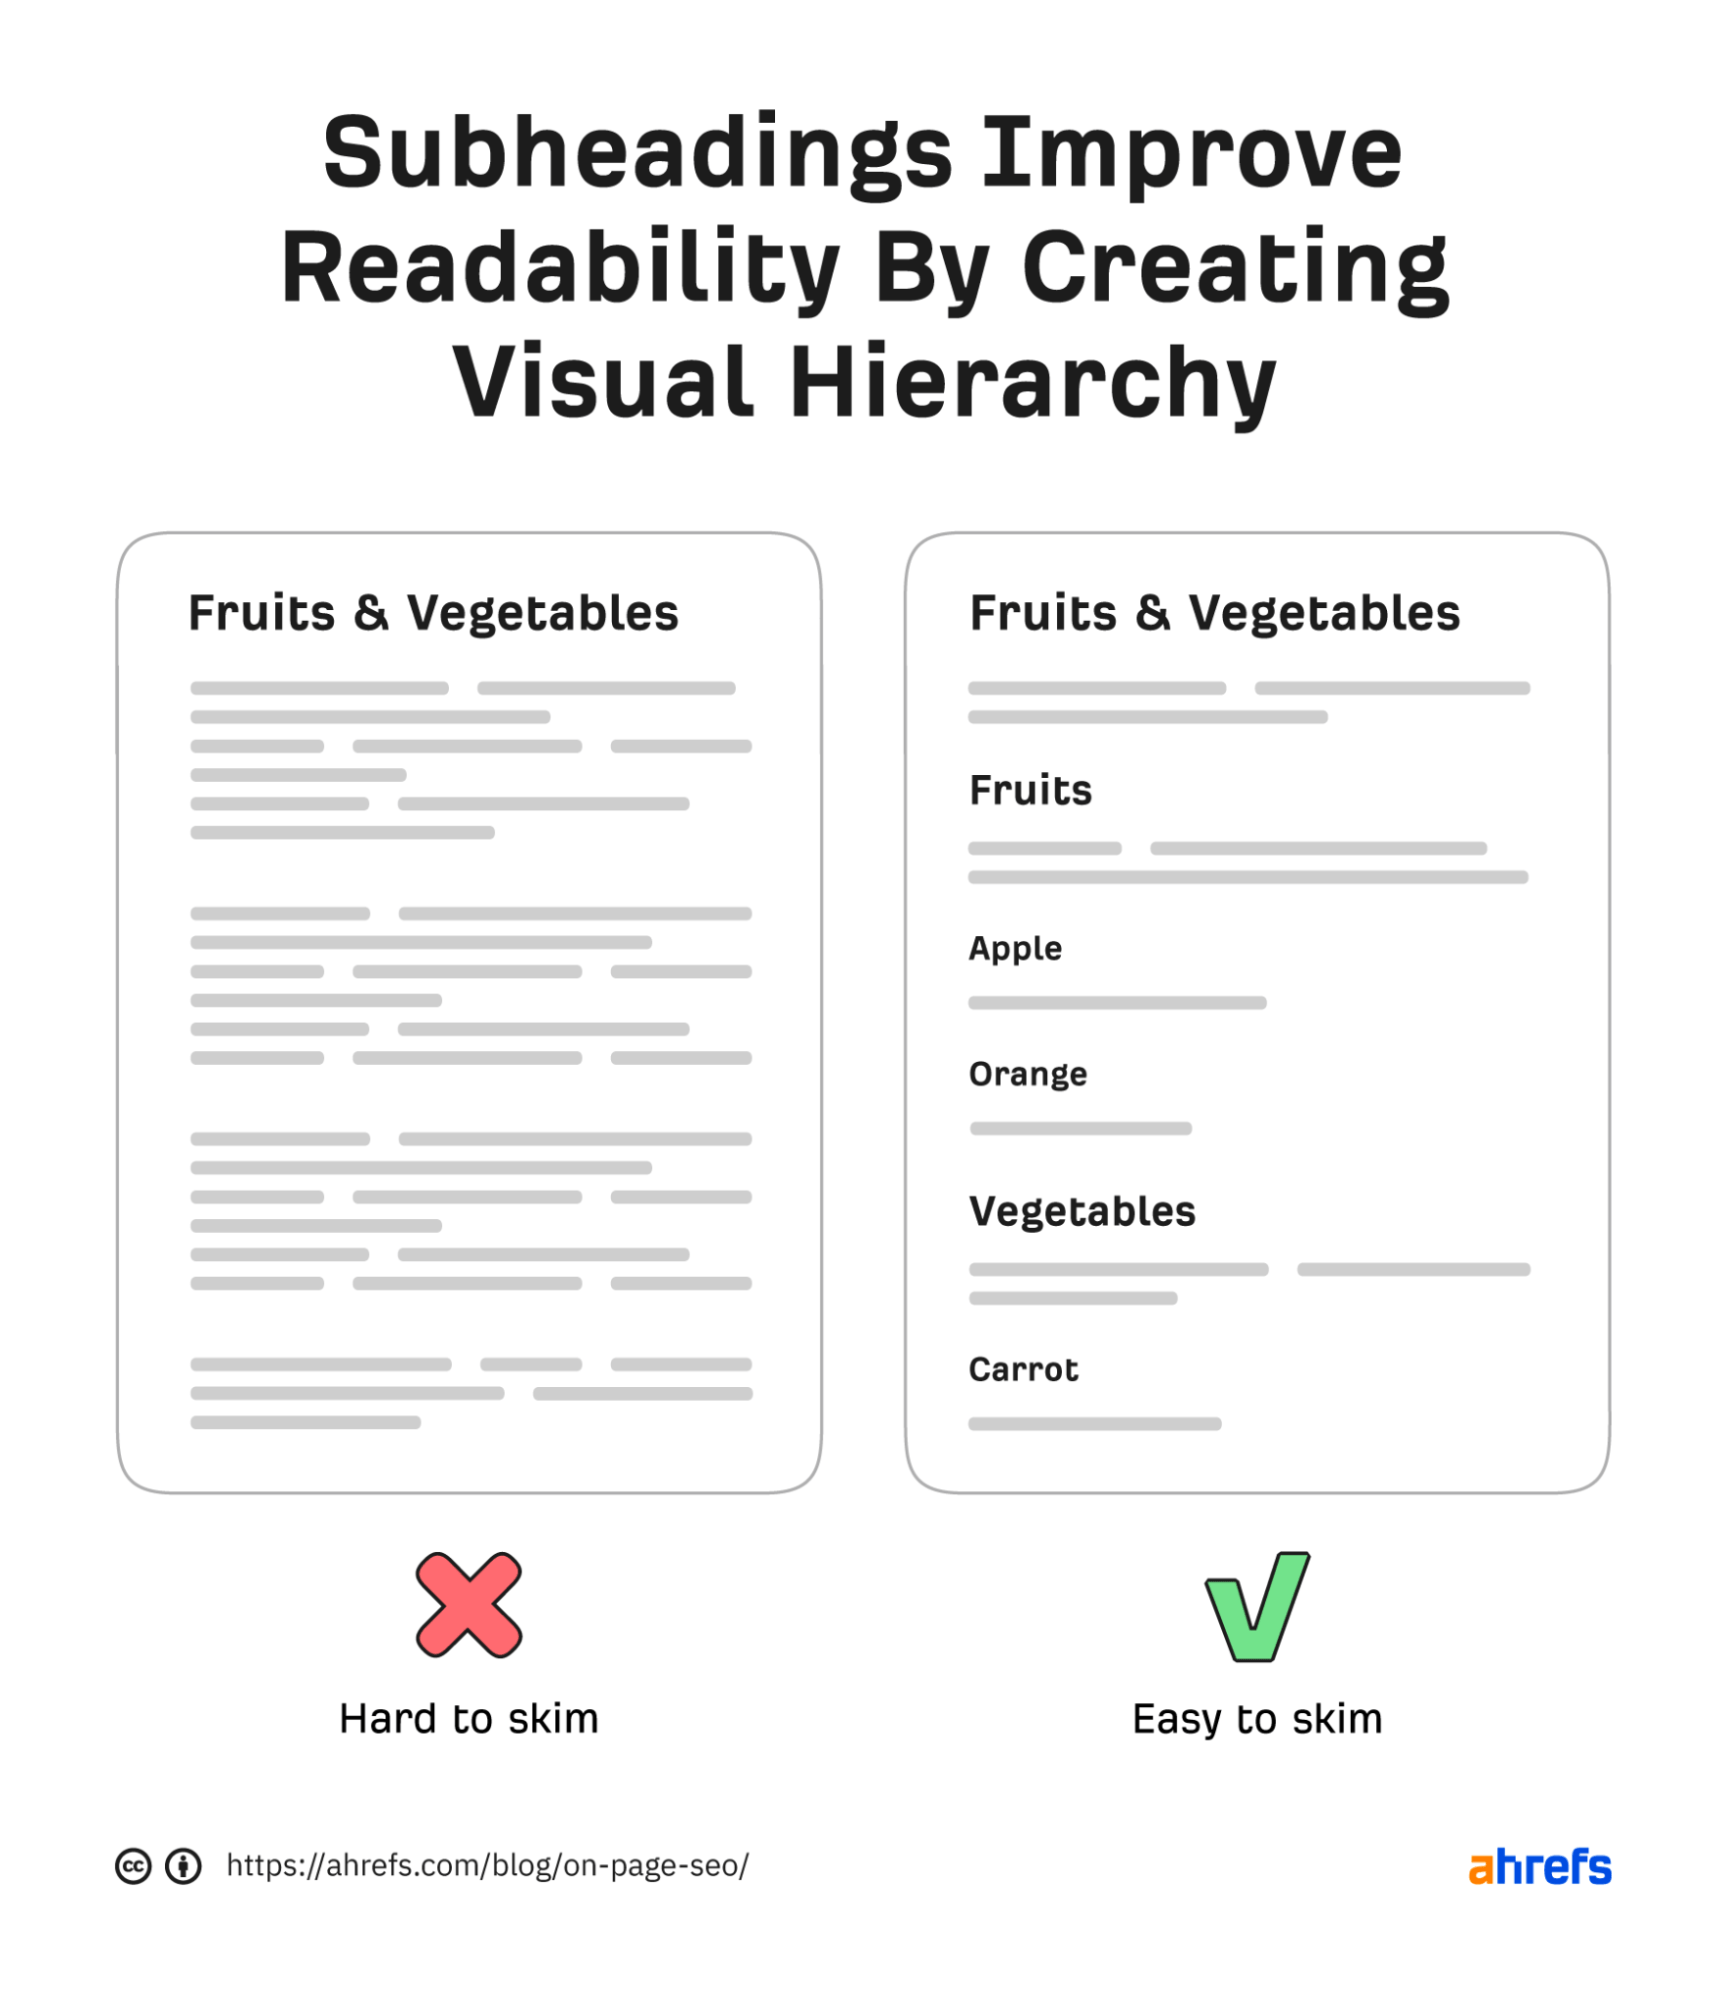 Subheadings improve readability by creating visual hierarchy